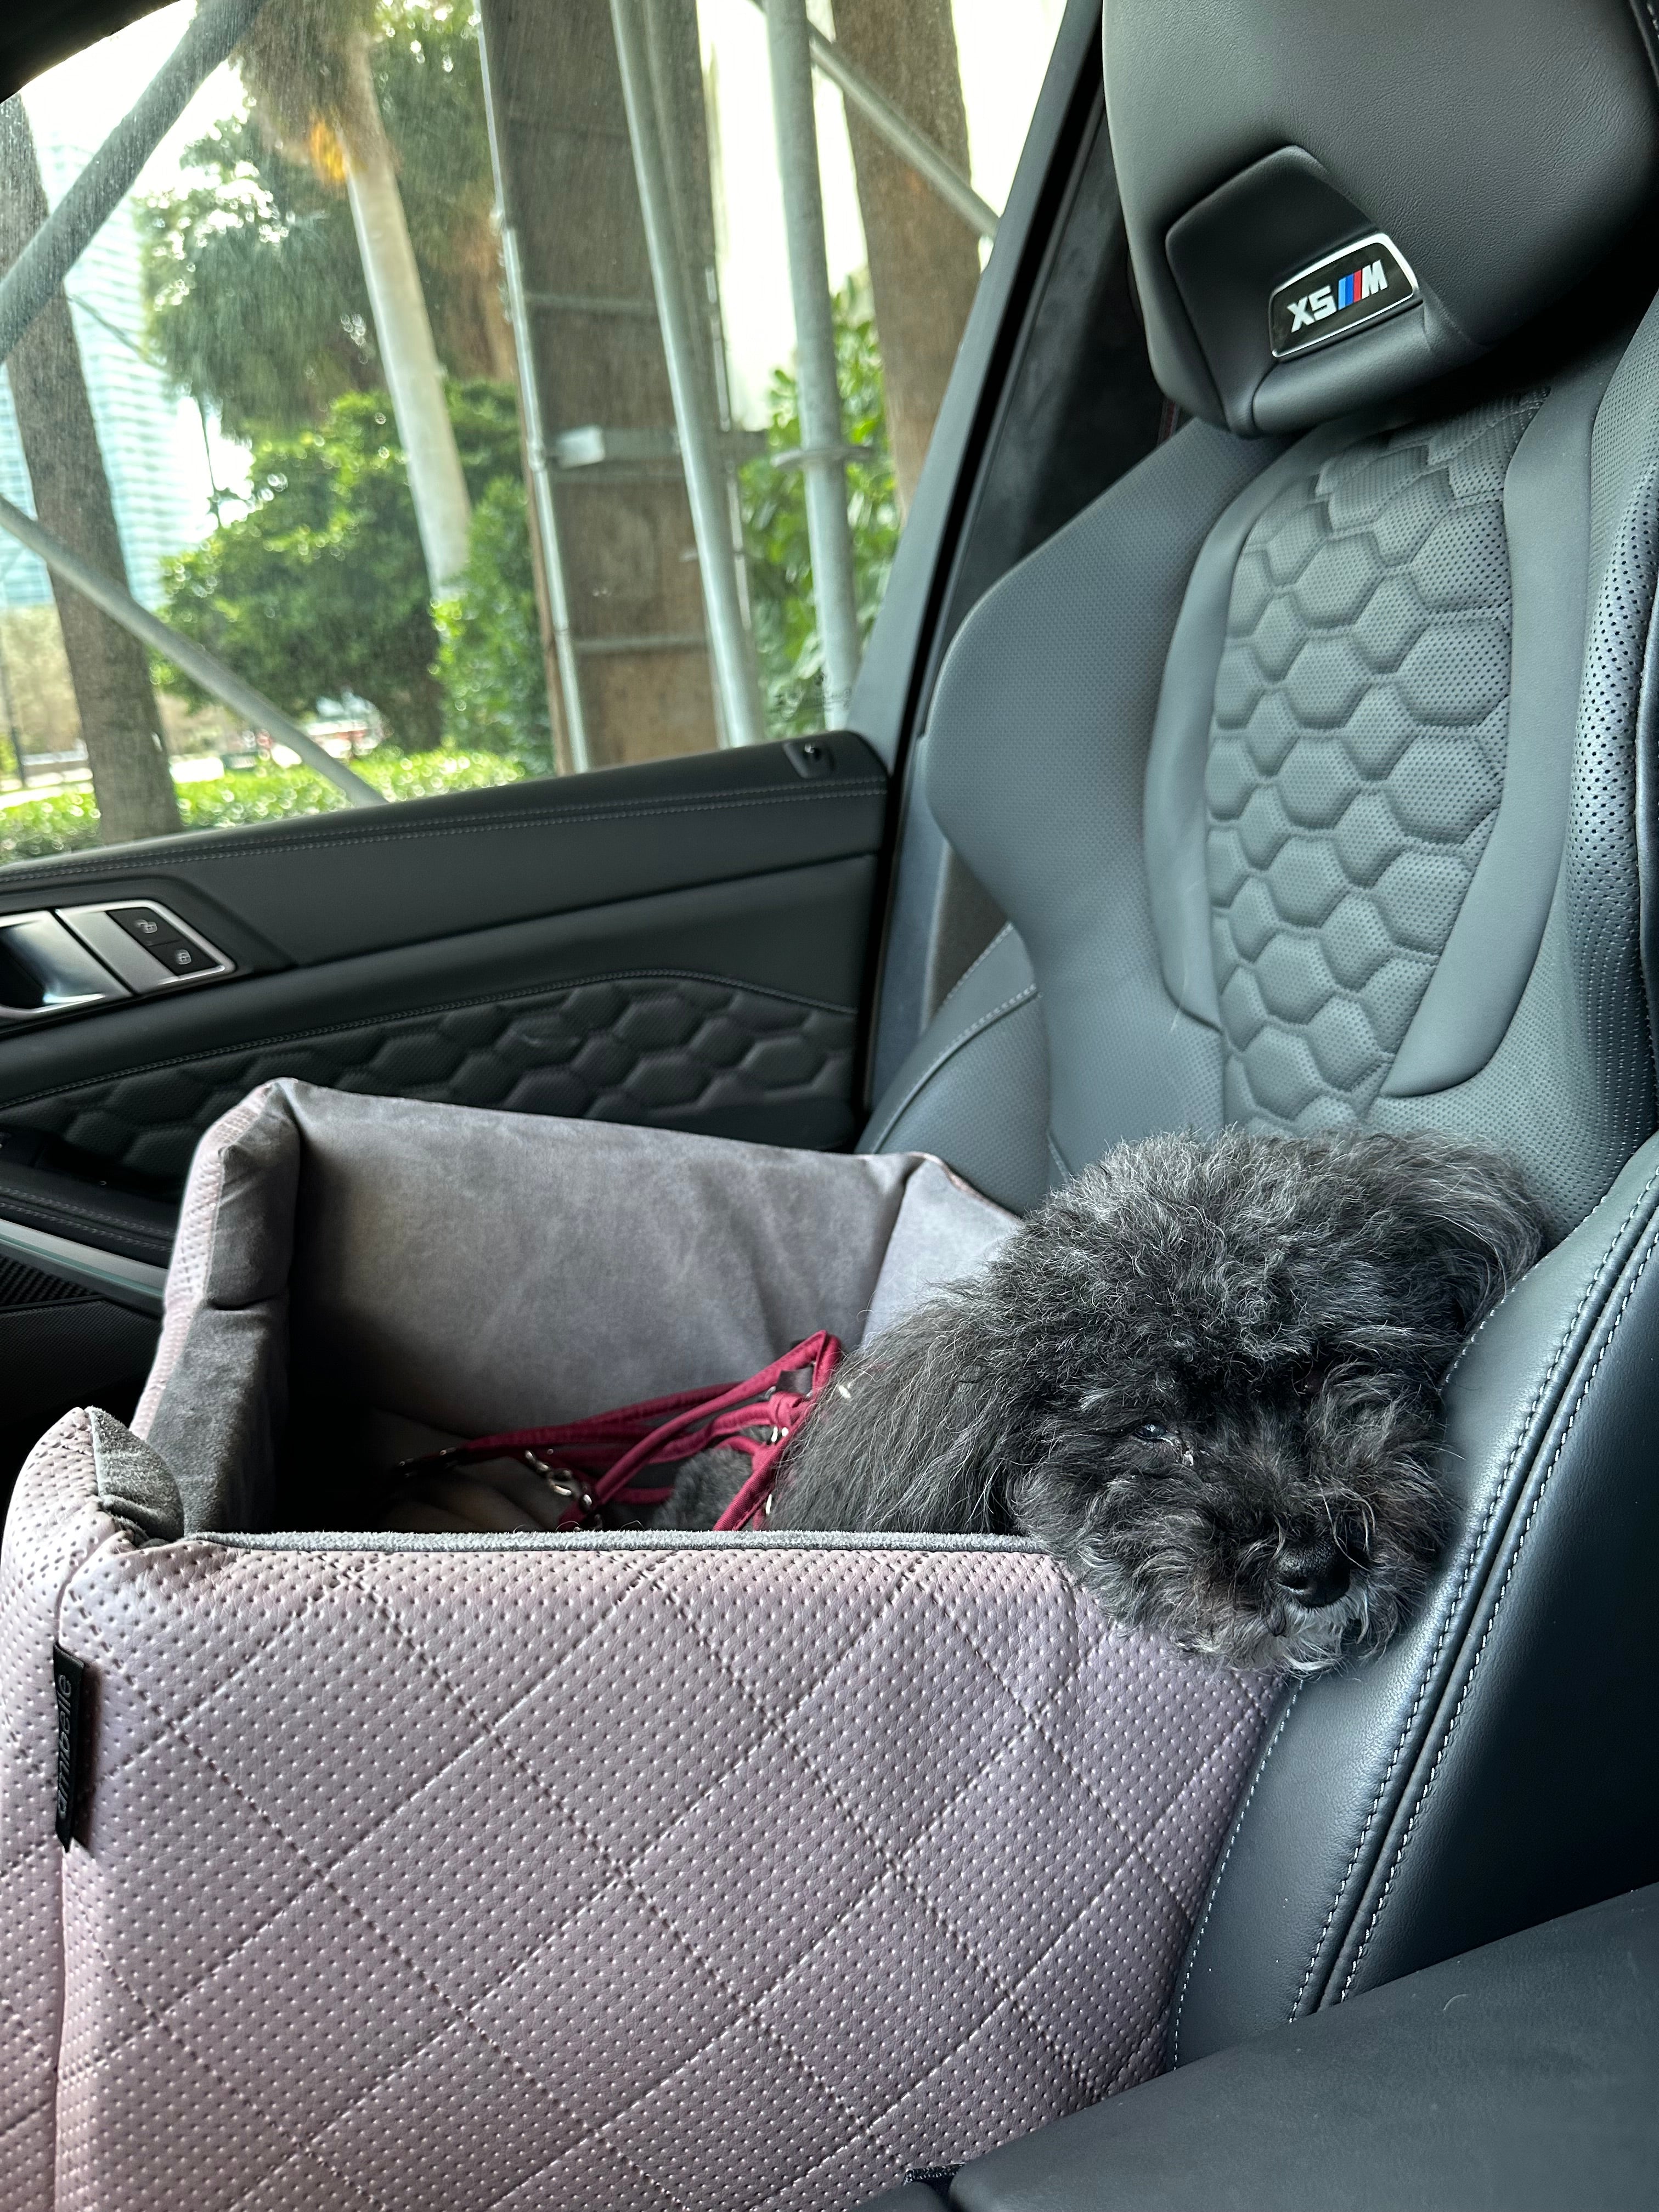 calm dog in LollyPup pet car seat going on a car ride